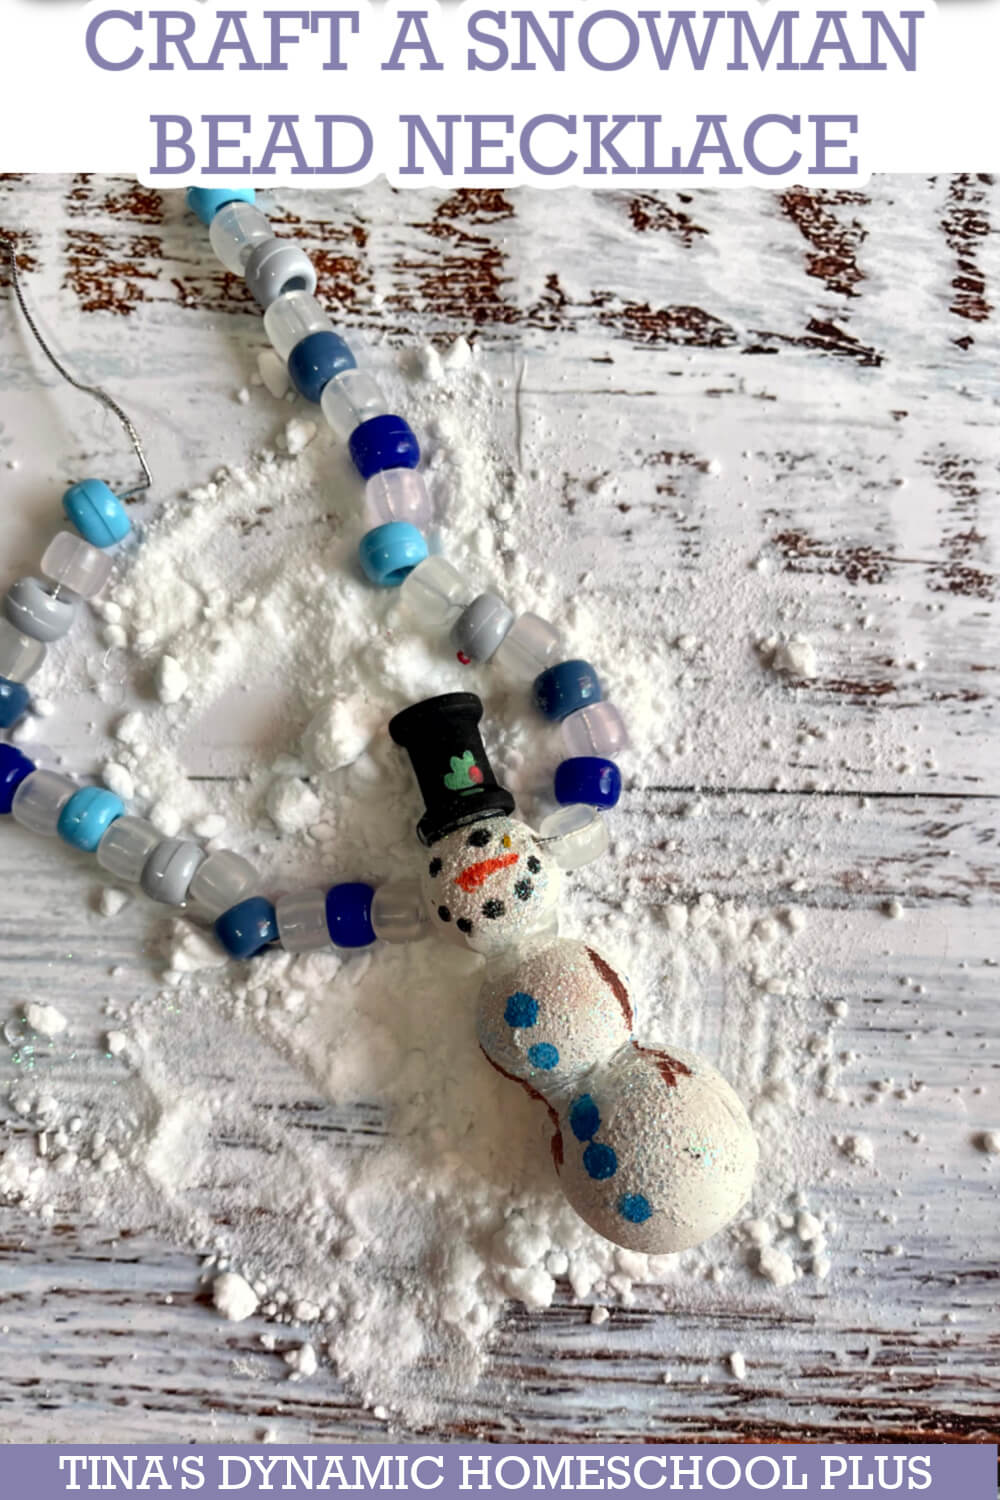 Popsicle Stick Snowman Hat Ornaments - Crafty Morning